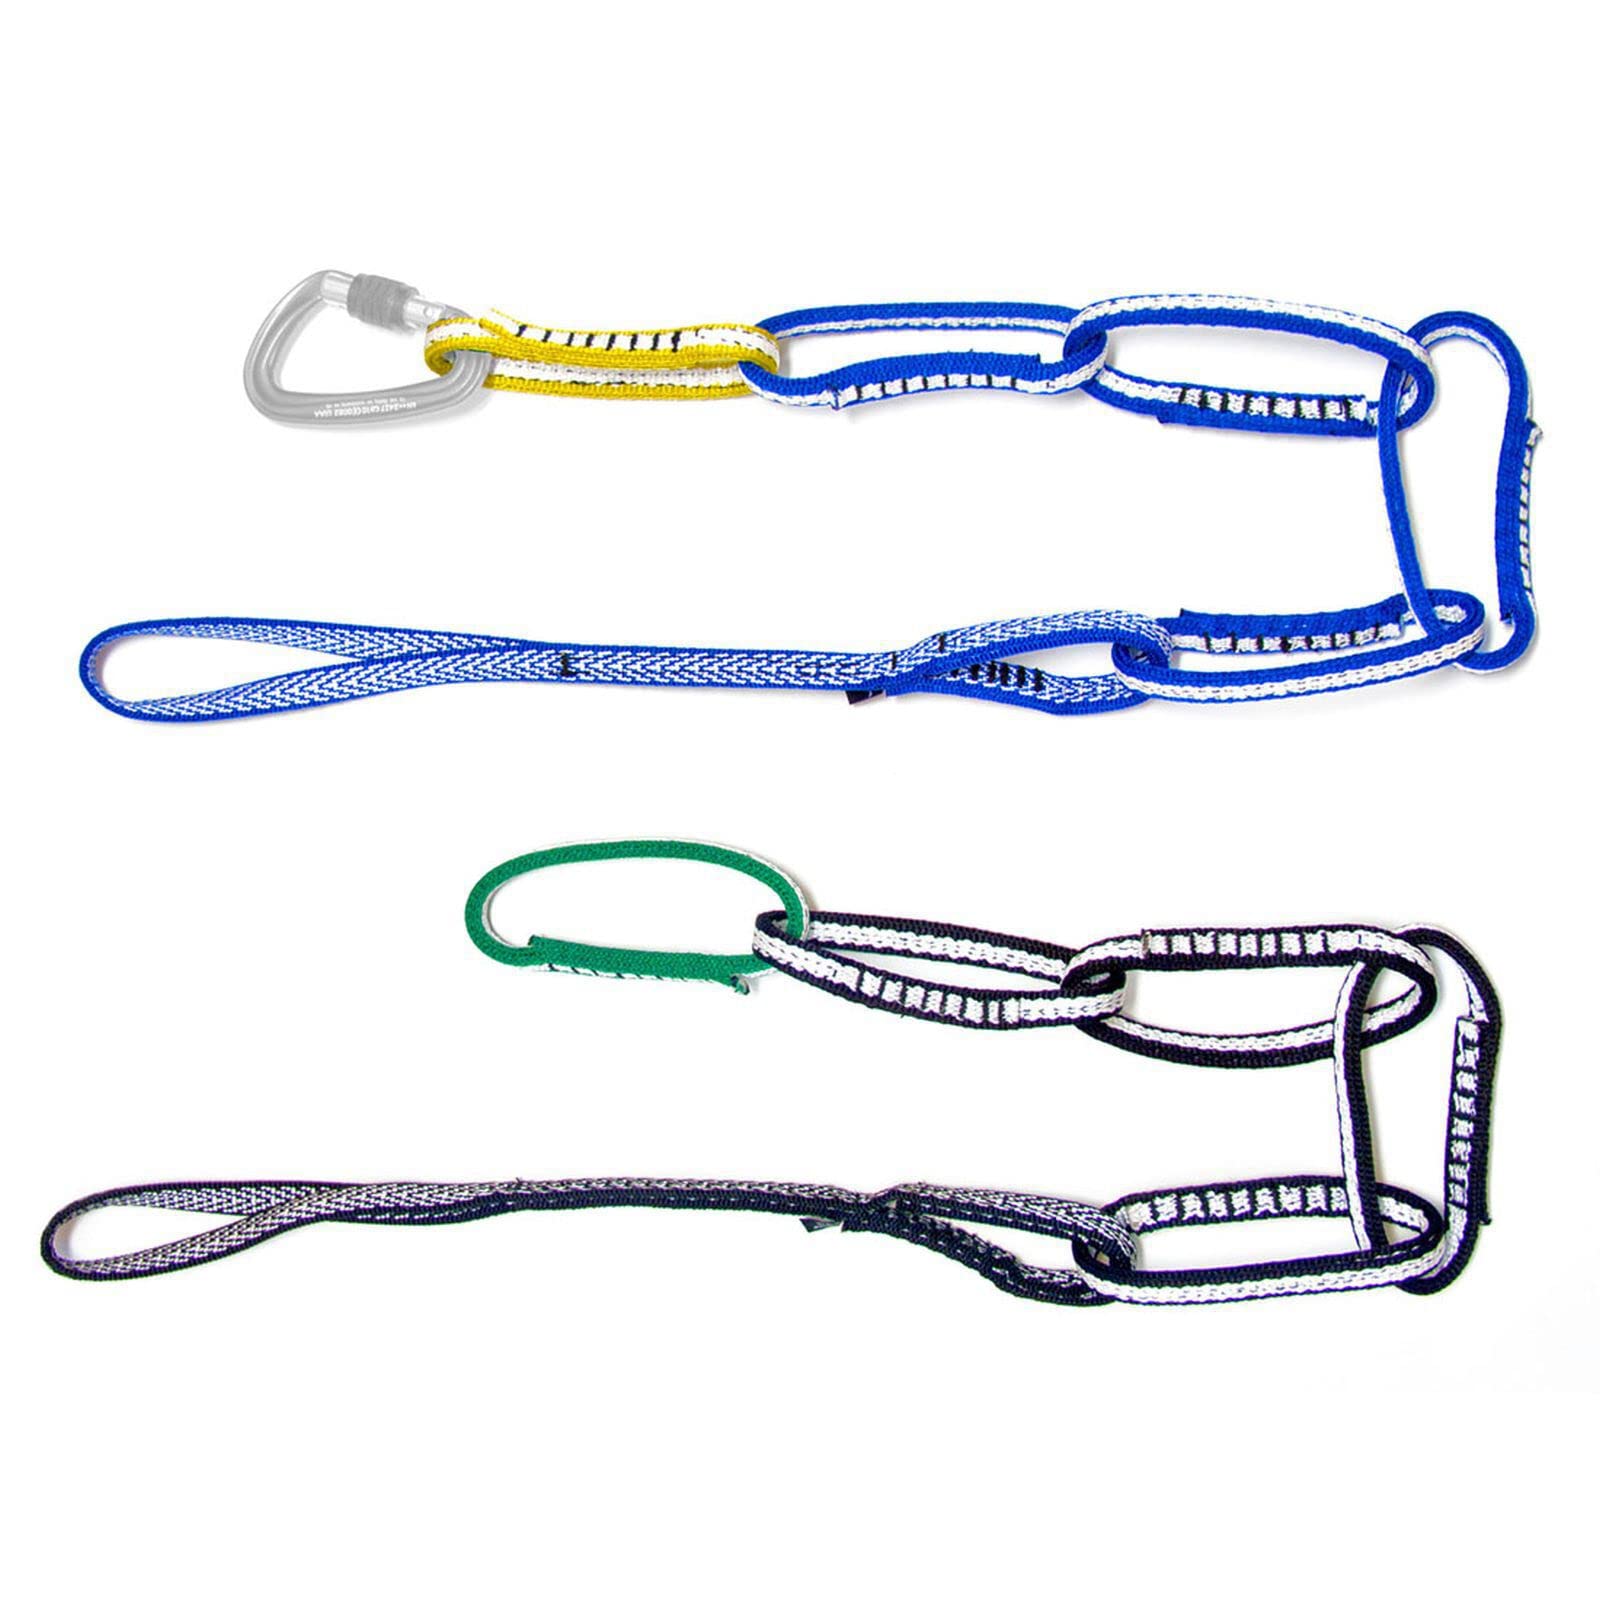 Metolius Personal Anchor System, Black/ Green, 42 inches - Opticdeals